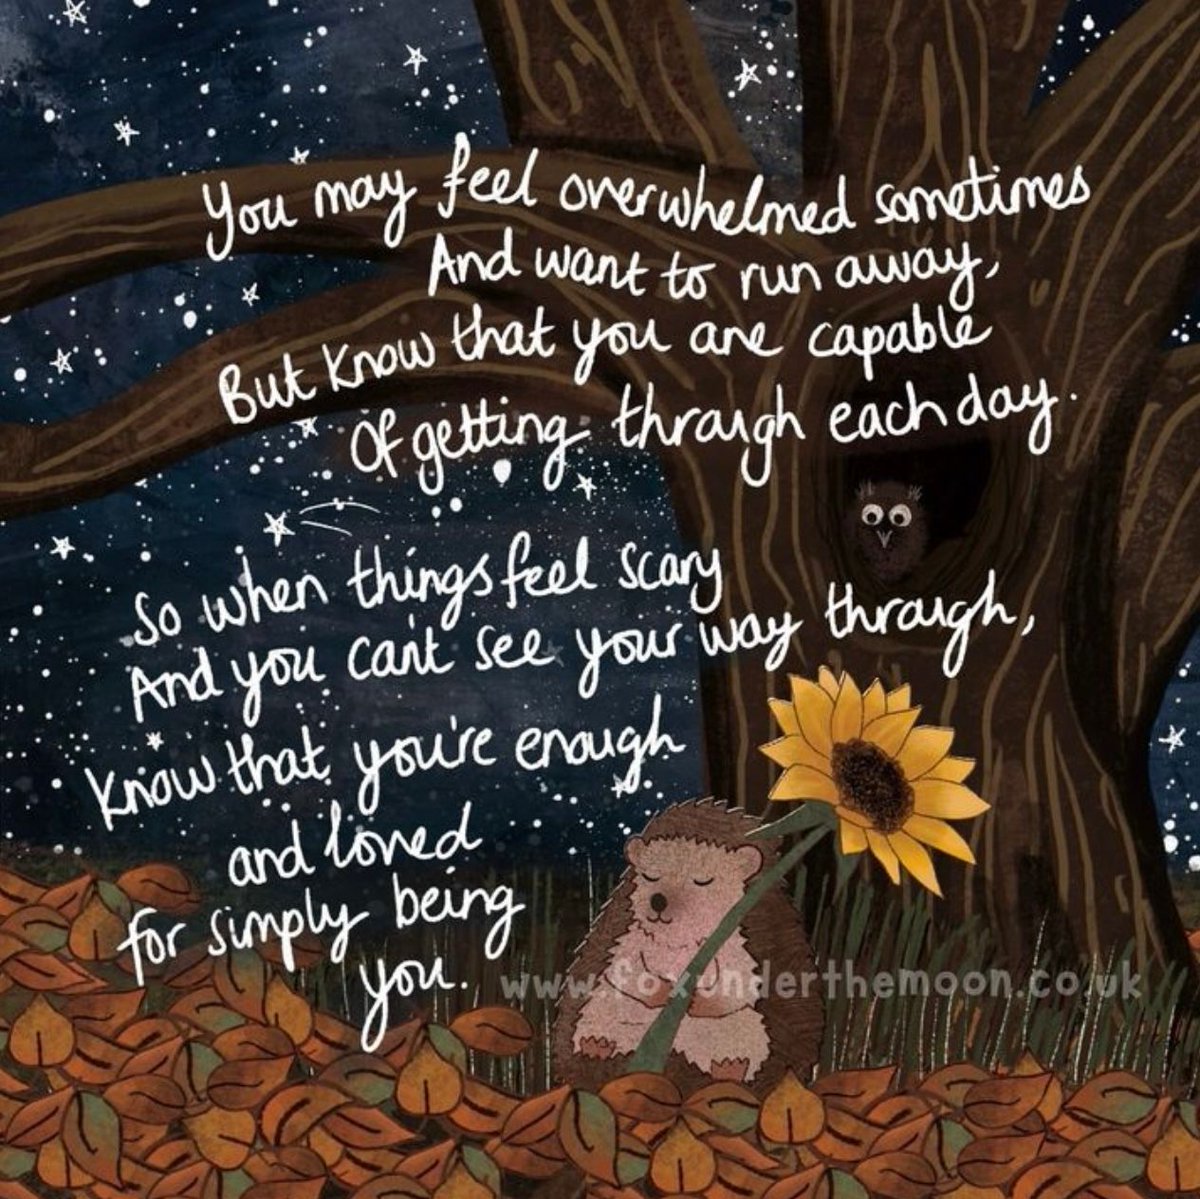 You may feel overwhelmed sometimes and want to run away But know that you are capable of getting through each day So when things feel scary And you can’t see your way through Know that you're enough and loved for simply being you ❤️ Art by foxunderthemoon_art